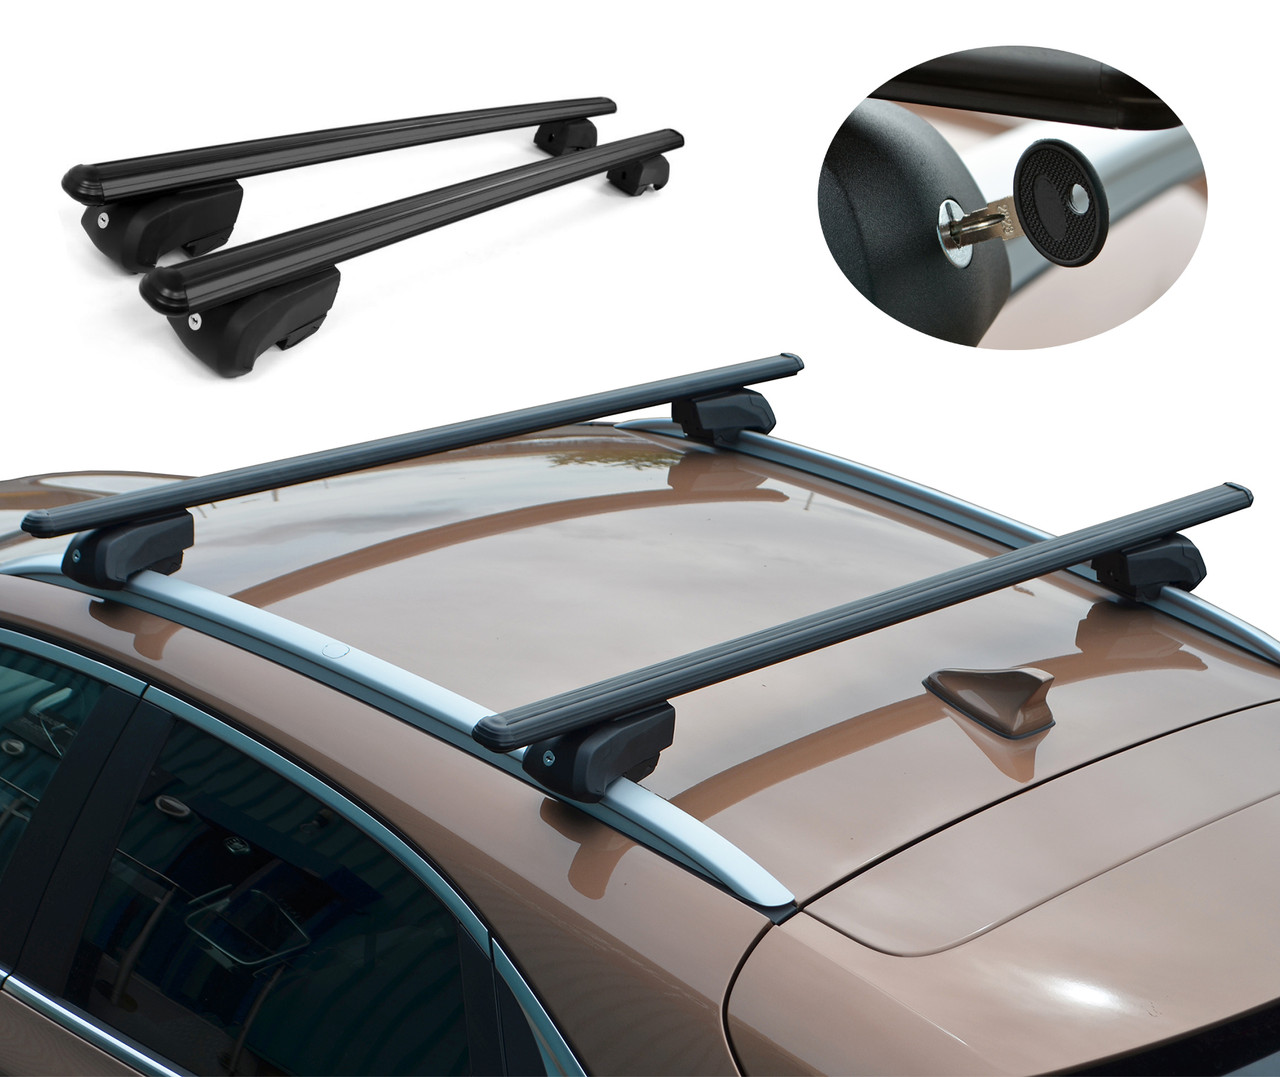 Black Cross Bars For Roof Rails To Fit Fiat Tipo Estate (2015+) 75KG Lockable